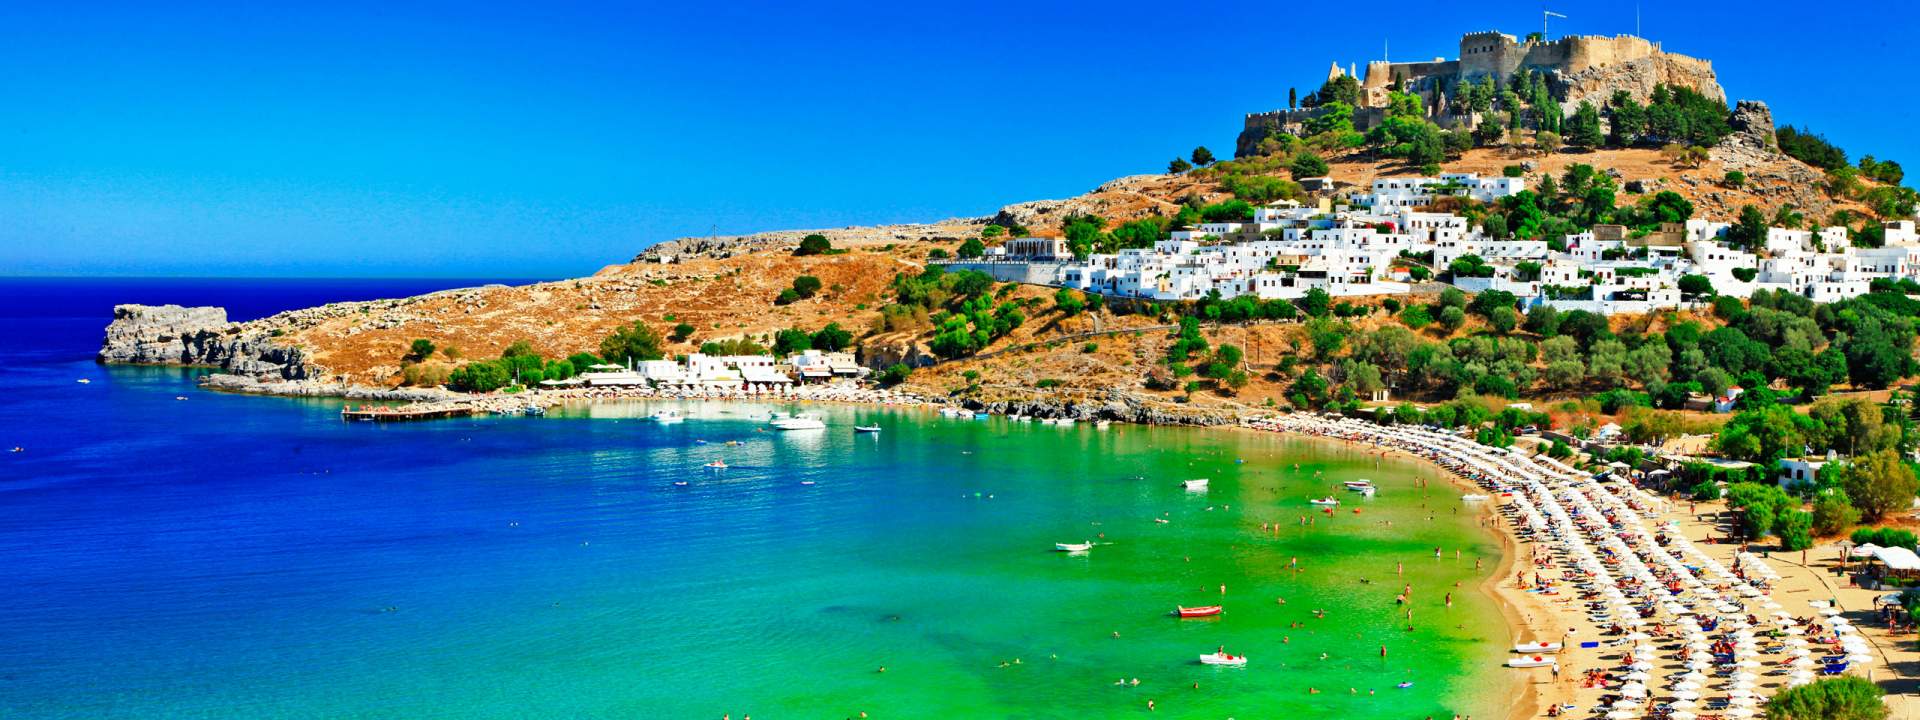 Discover Greece on board a gulet cabin cruise